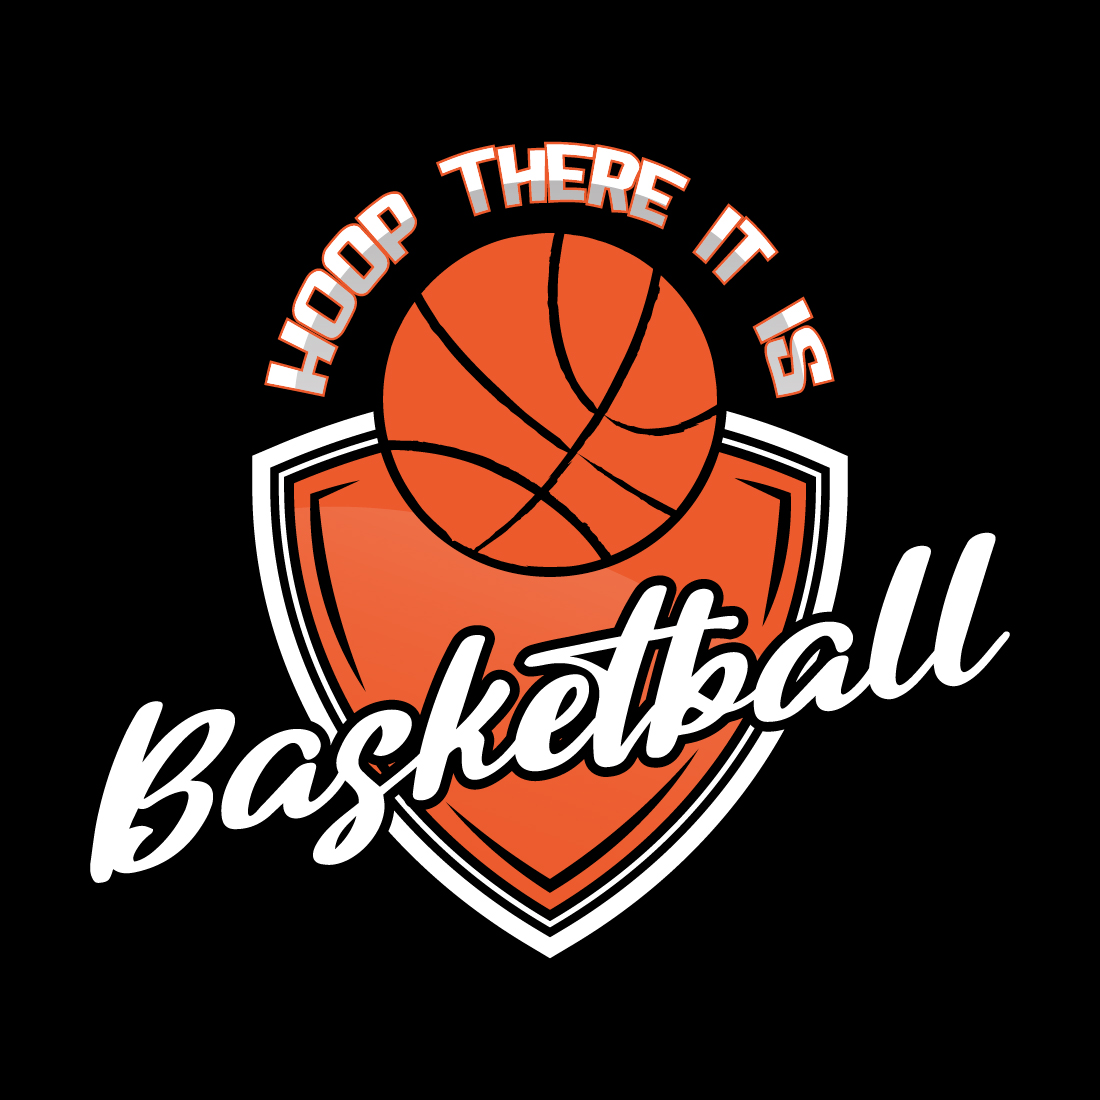 Basketball logo with the words hoop there it's basketball.